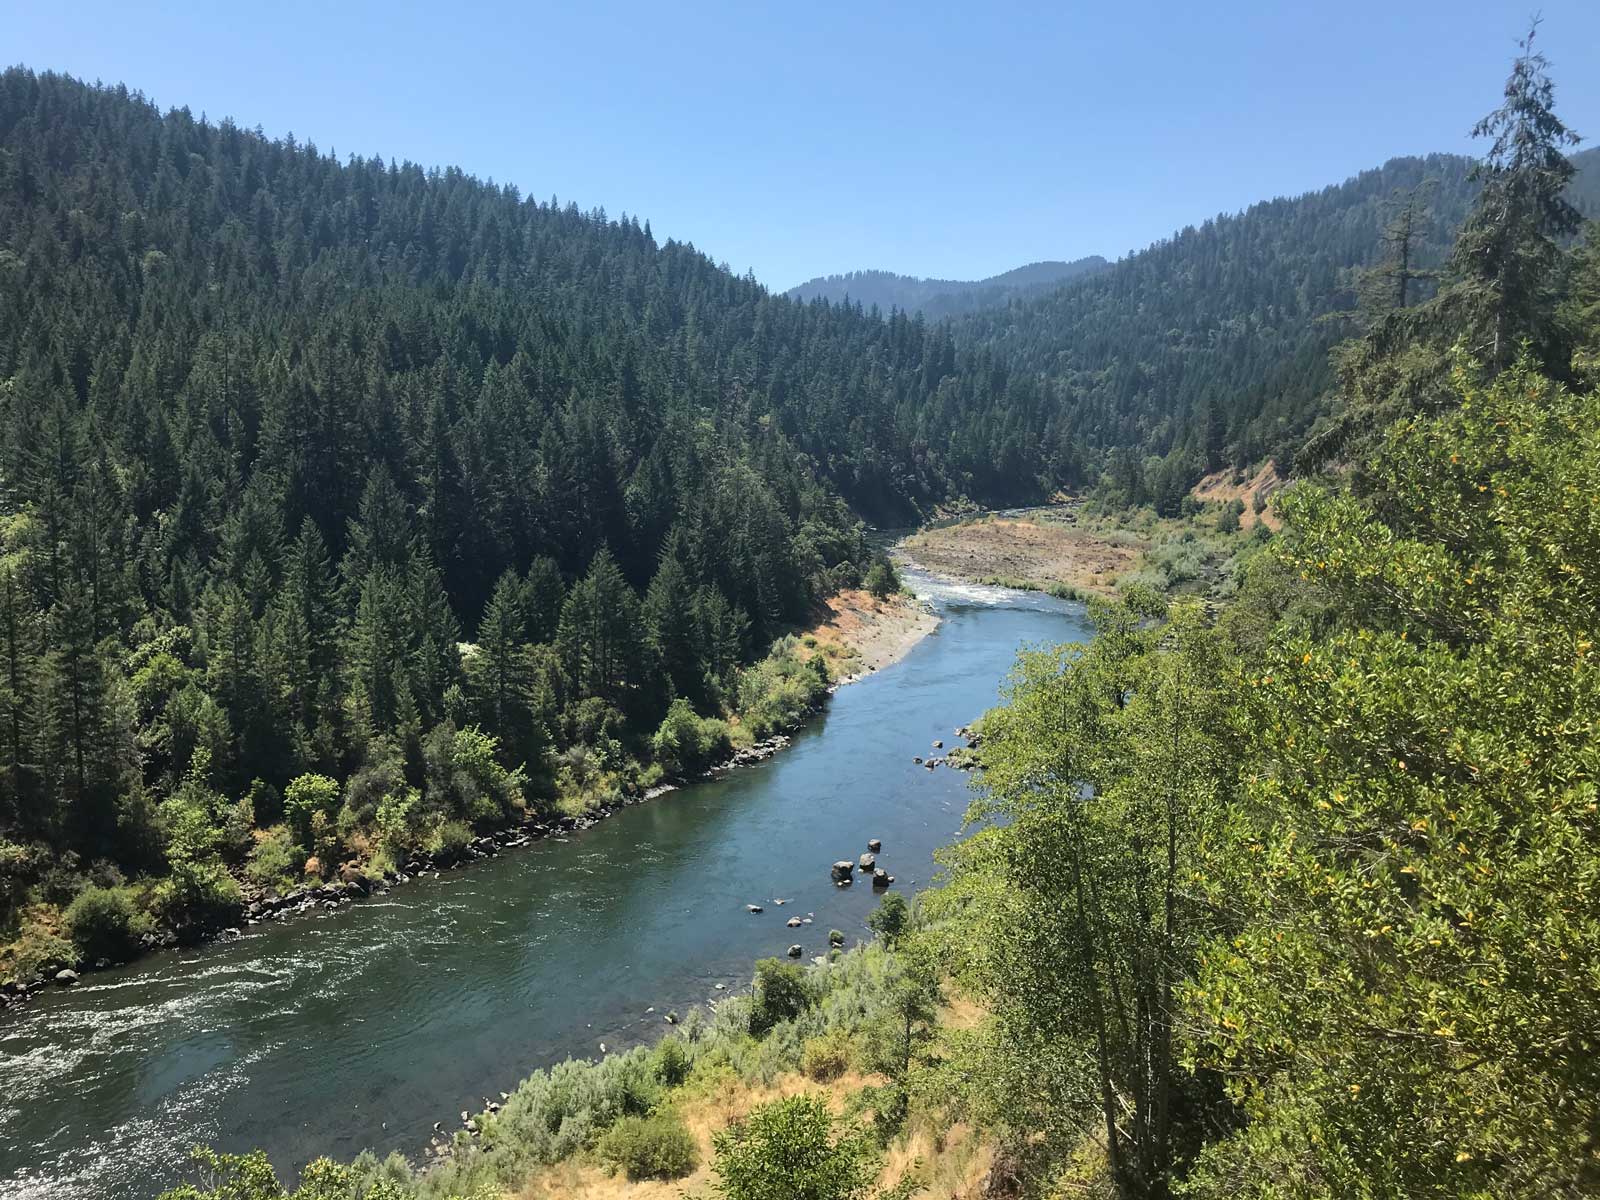 Rogue River between Agness and Illahe in the Shasta Agness Planning Area